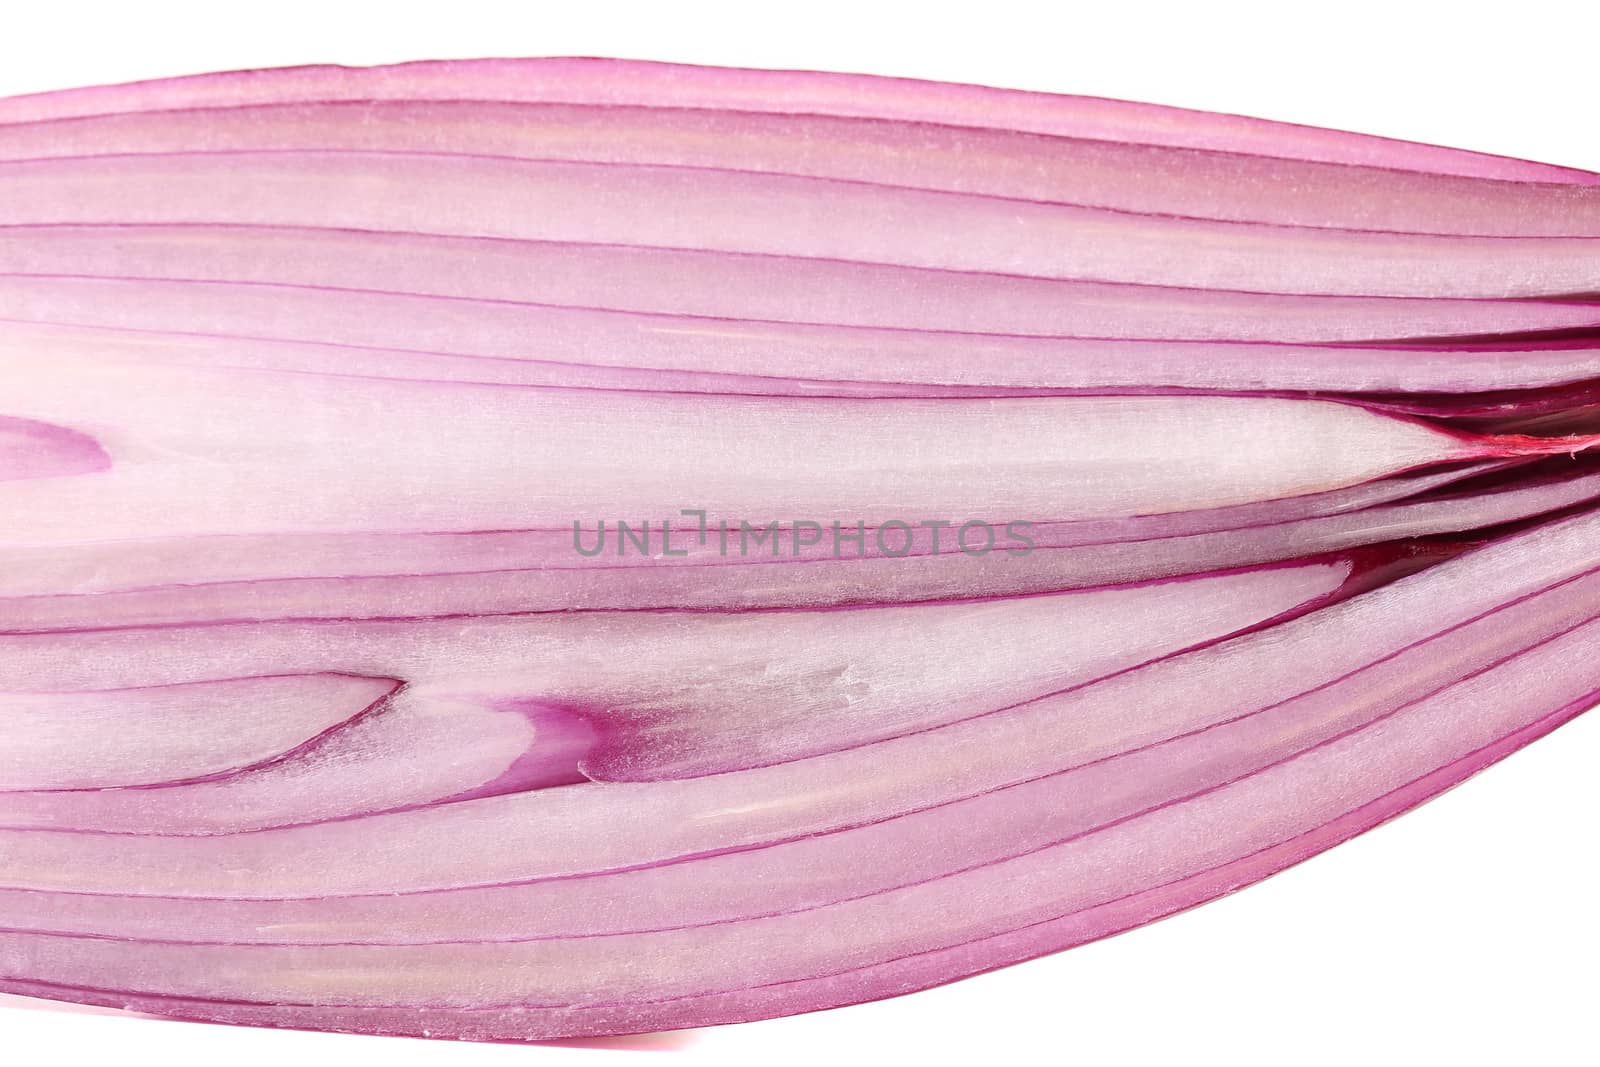 Red onion, sliced in half by indigolotos